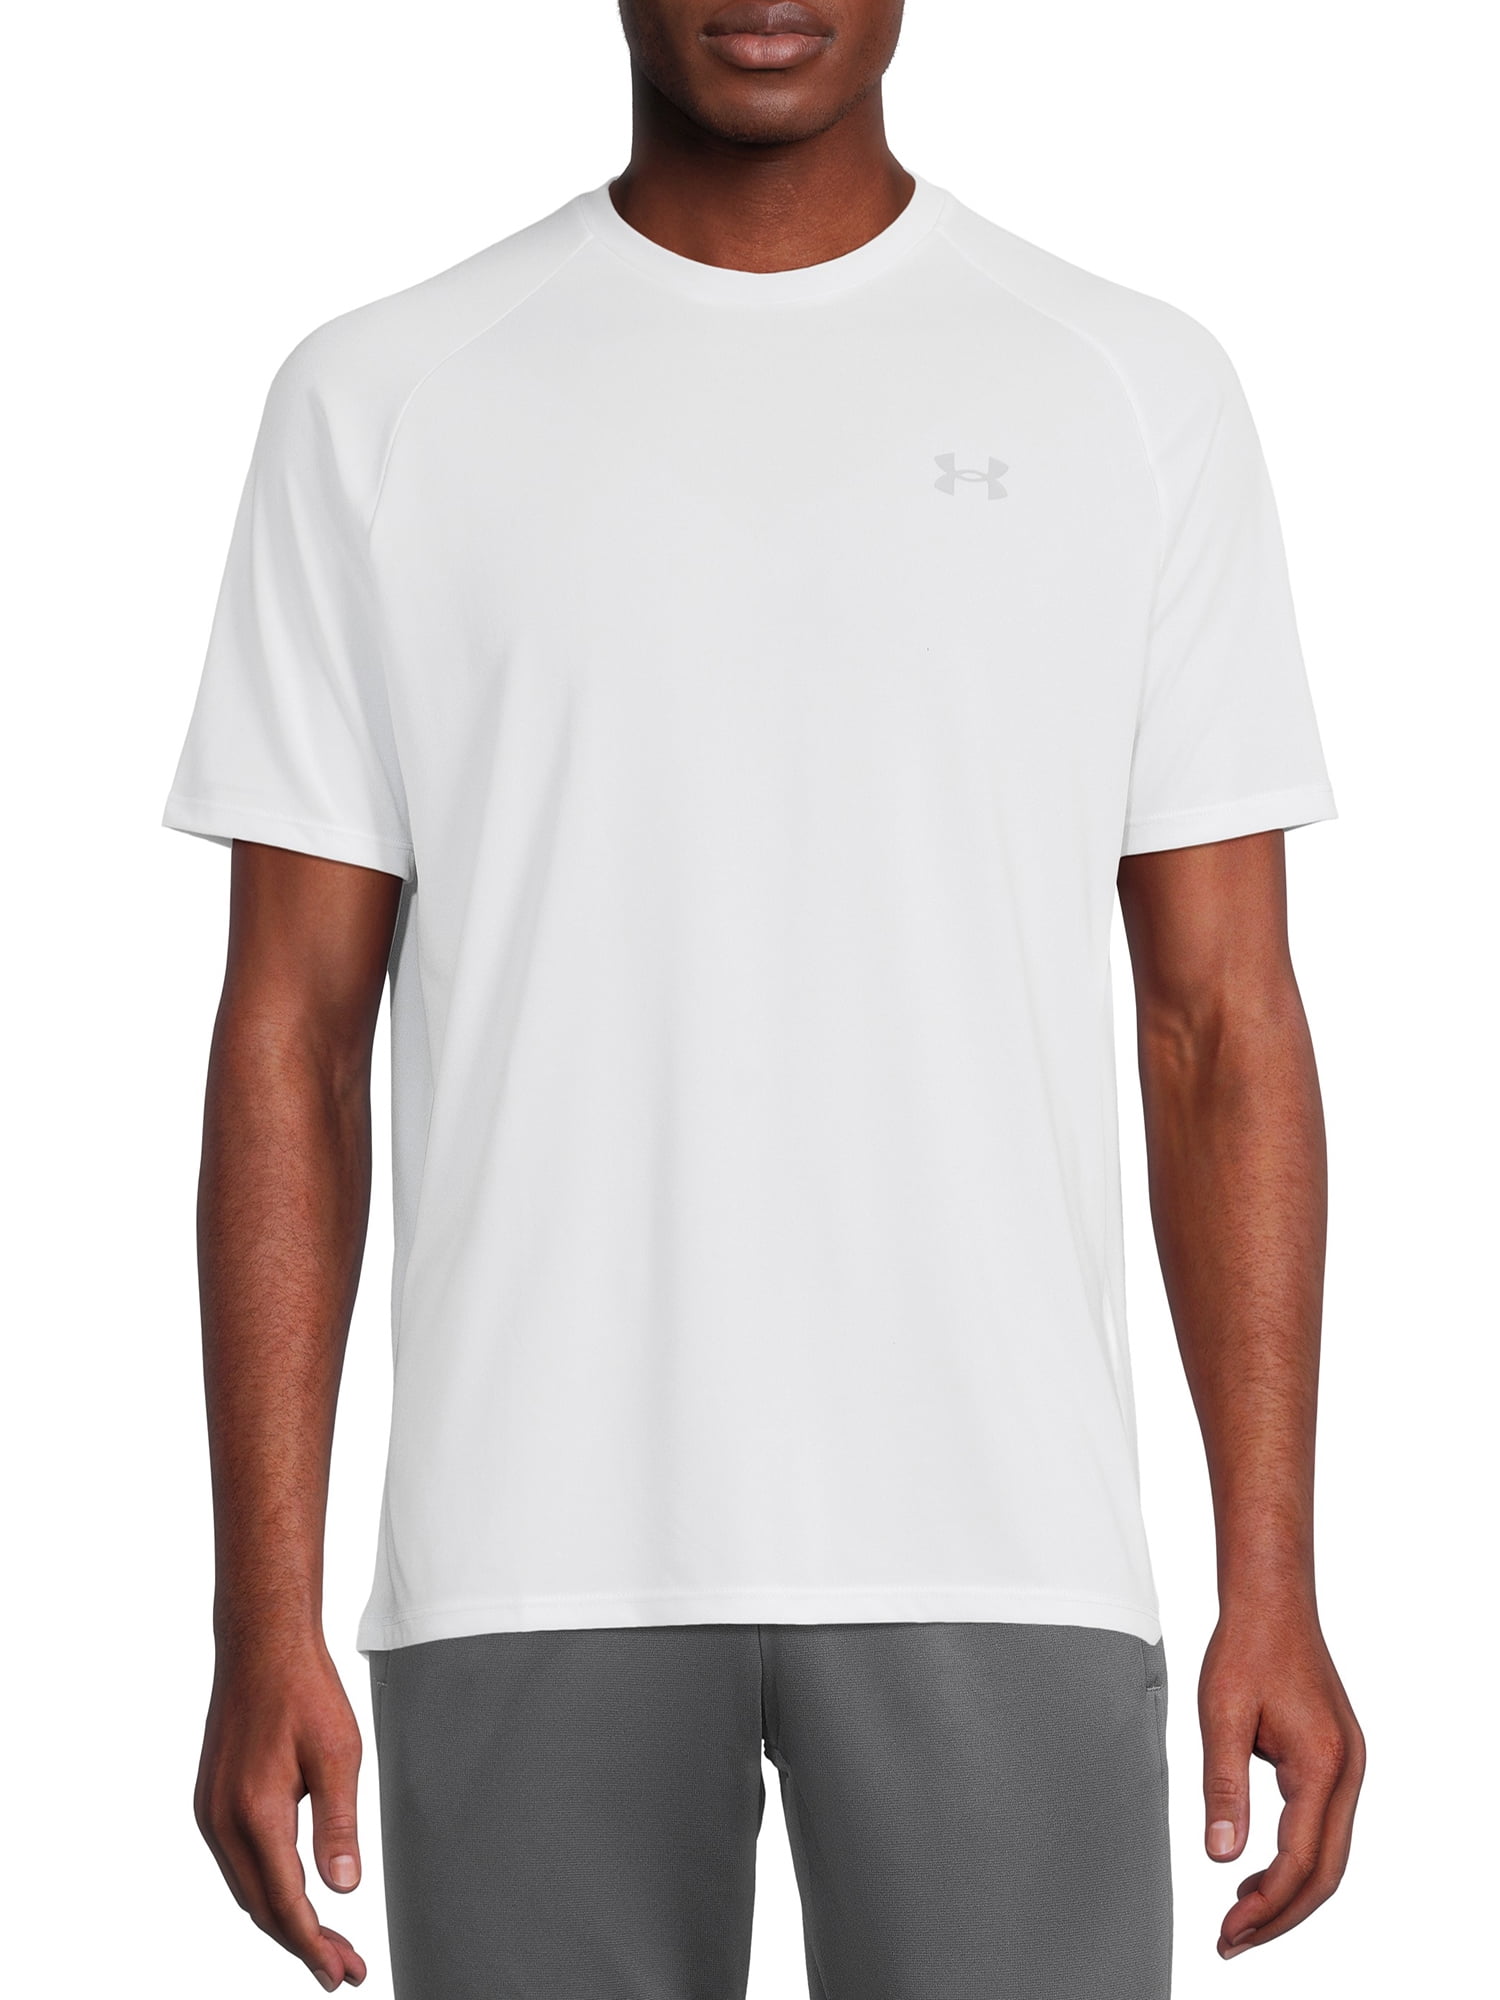 Under Armour Shirt Women's 3x UA Tech Logo Graphic Tee With Tags for sale online 